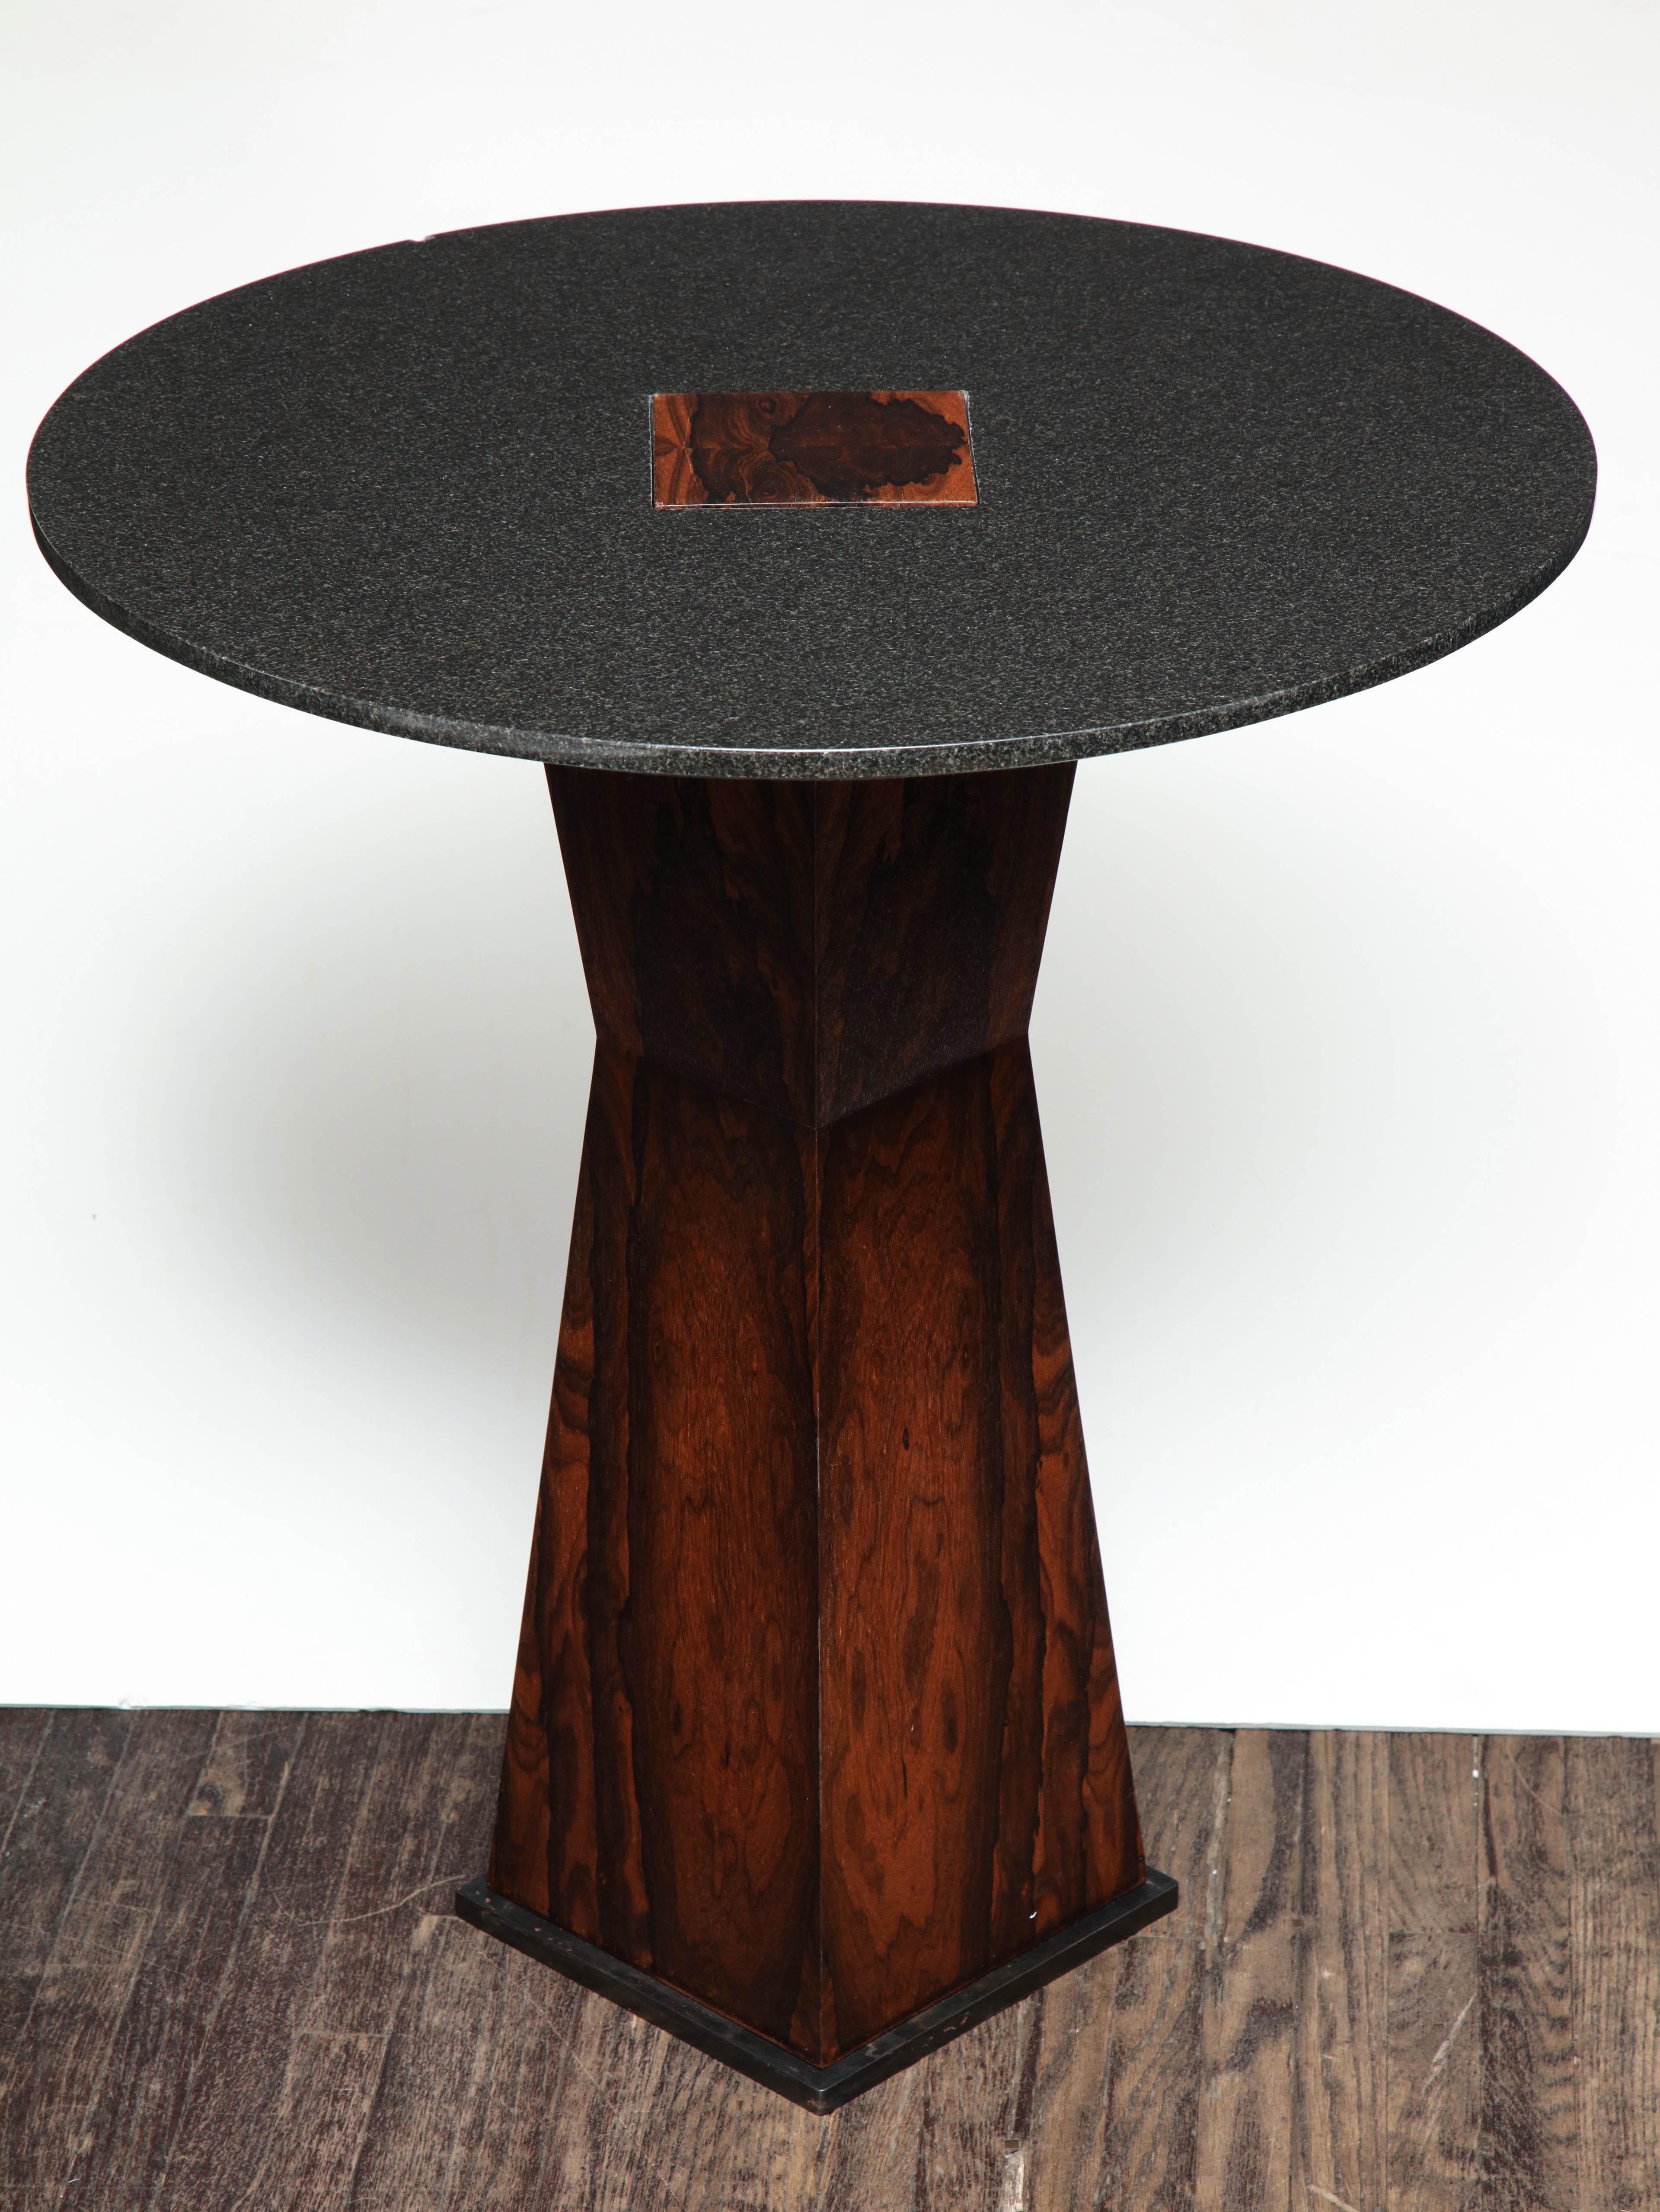 Absolute black granite side table with patinated steel.
Base: Sculptural base made of French polished Ziricote wood.